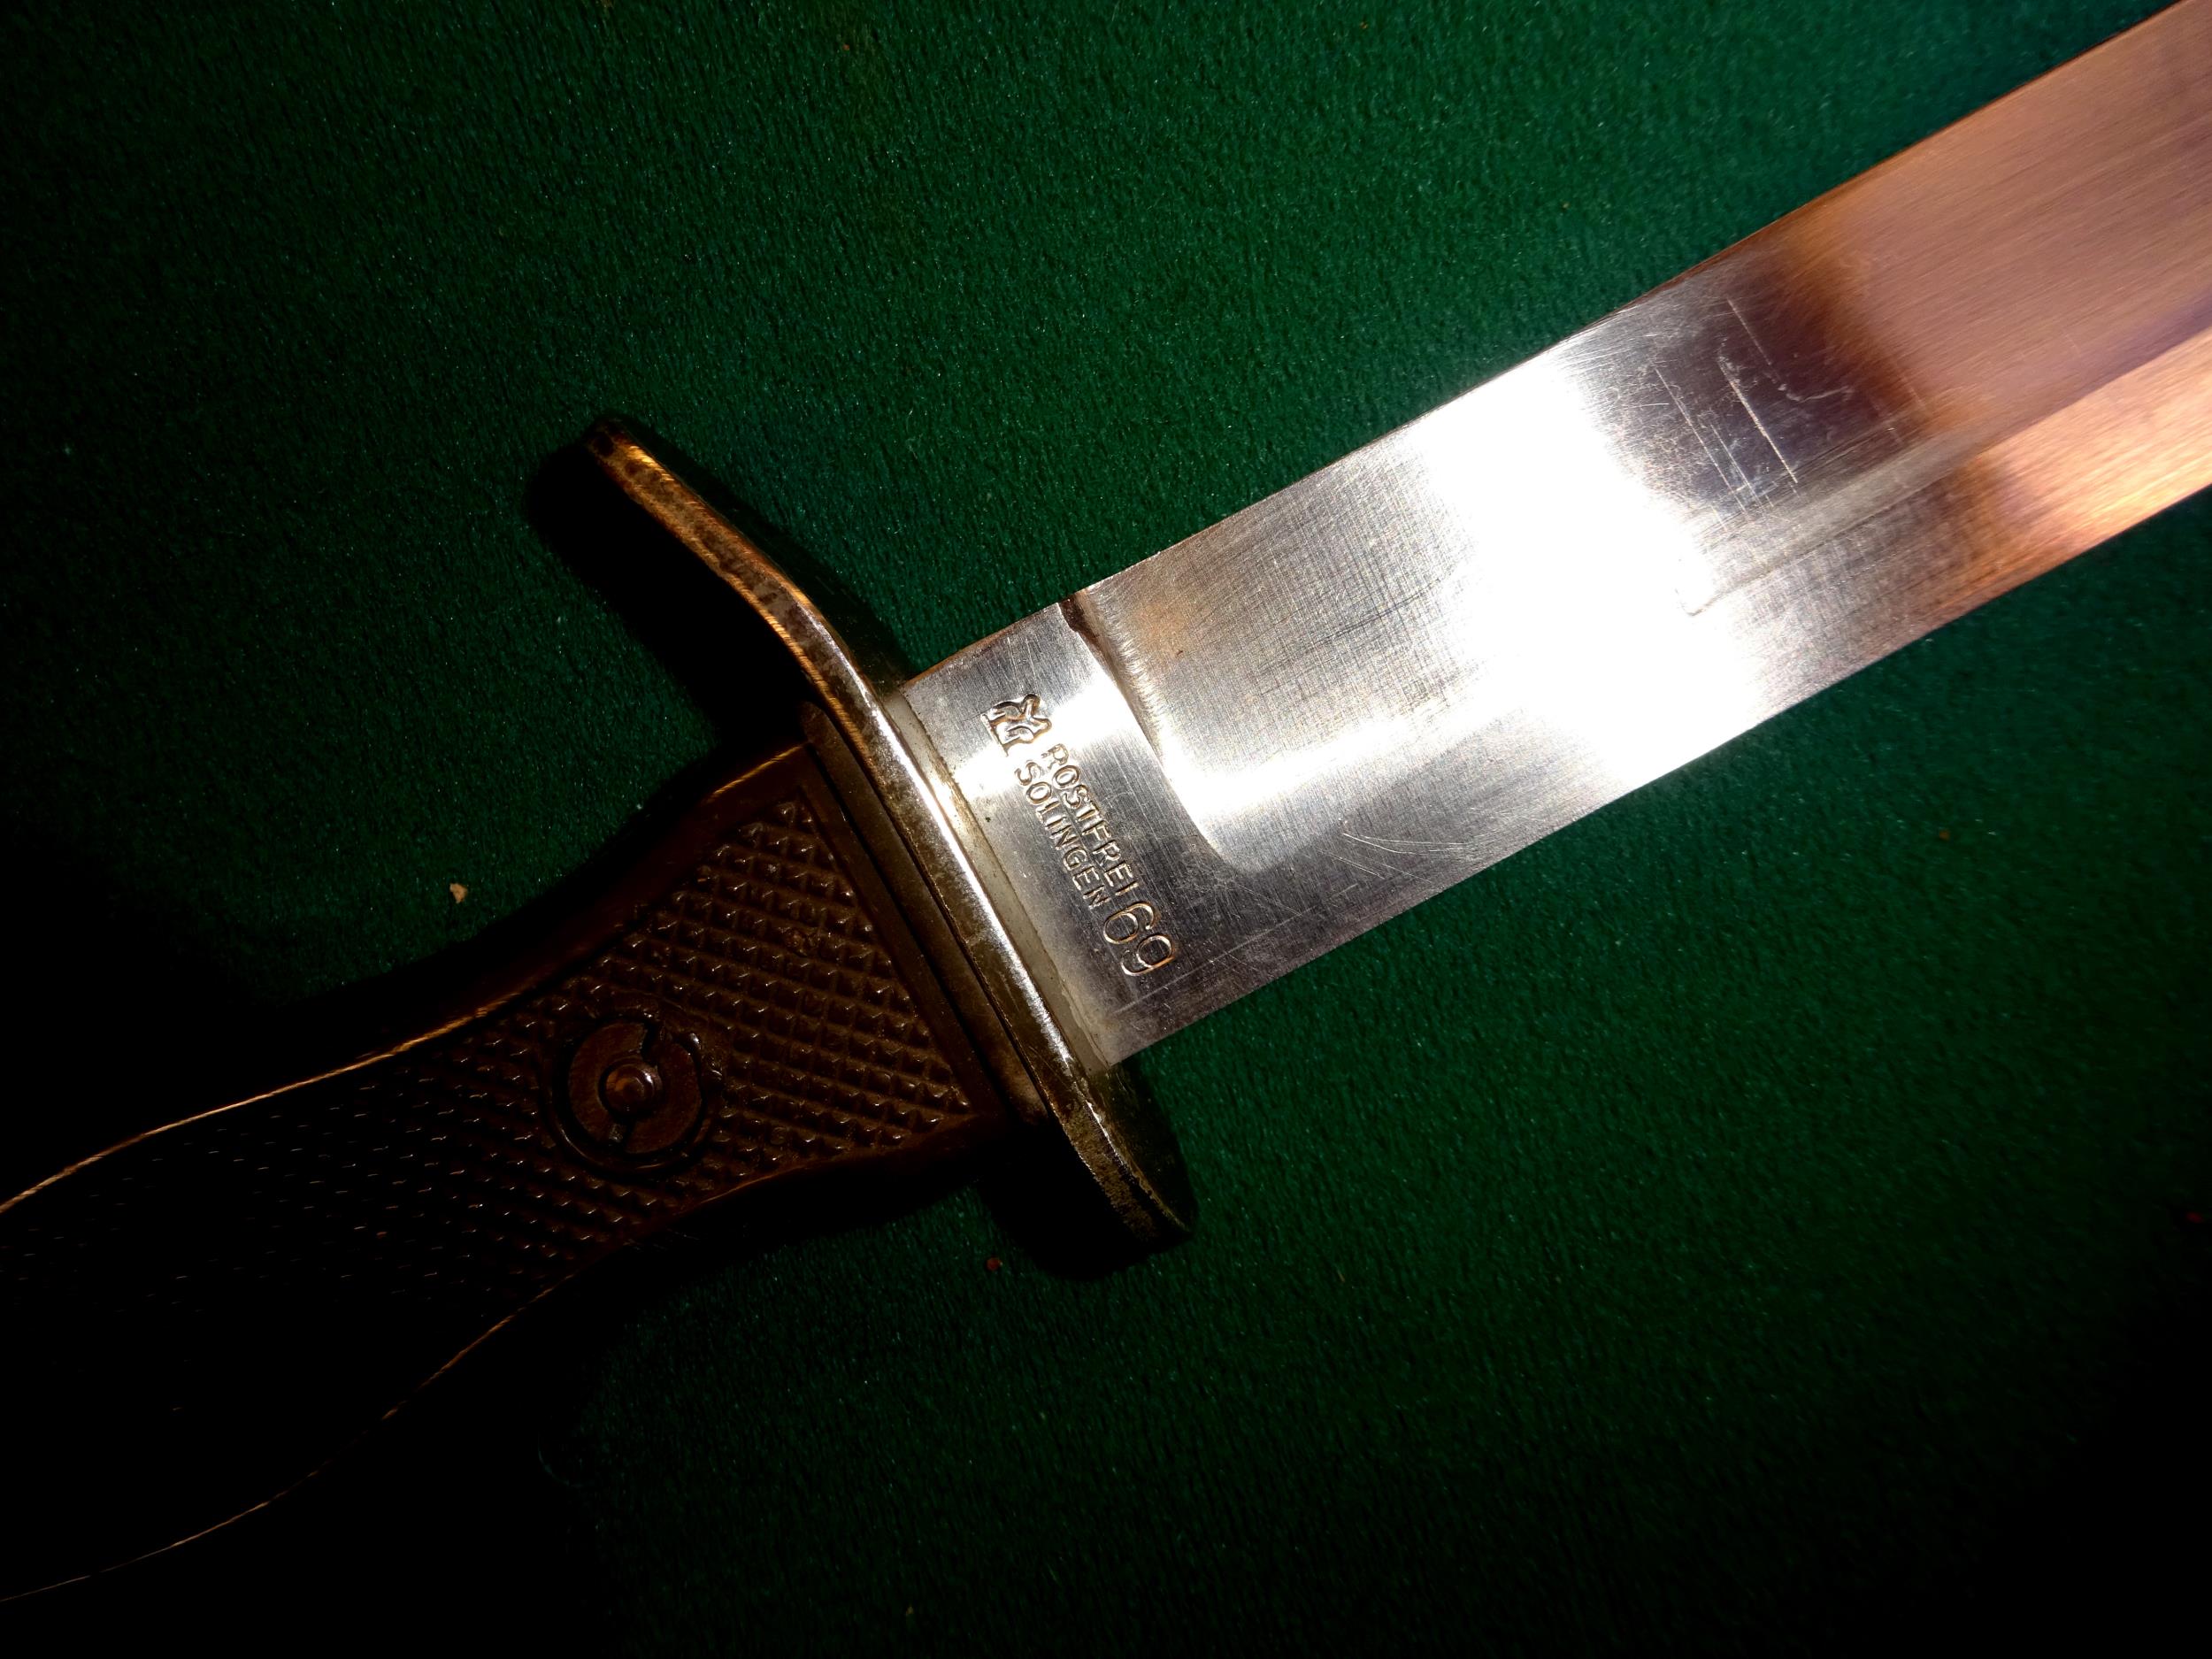 A Wilkinson survival knife c 1970, 2 German combat knives; 2 other Continental survival knives. - Image 6 of 6